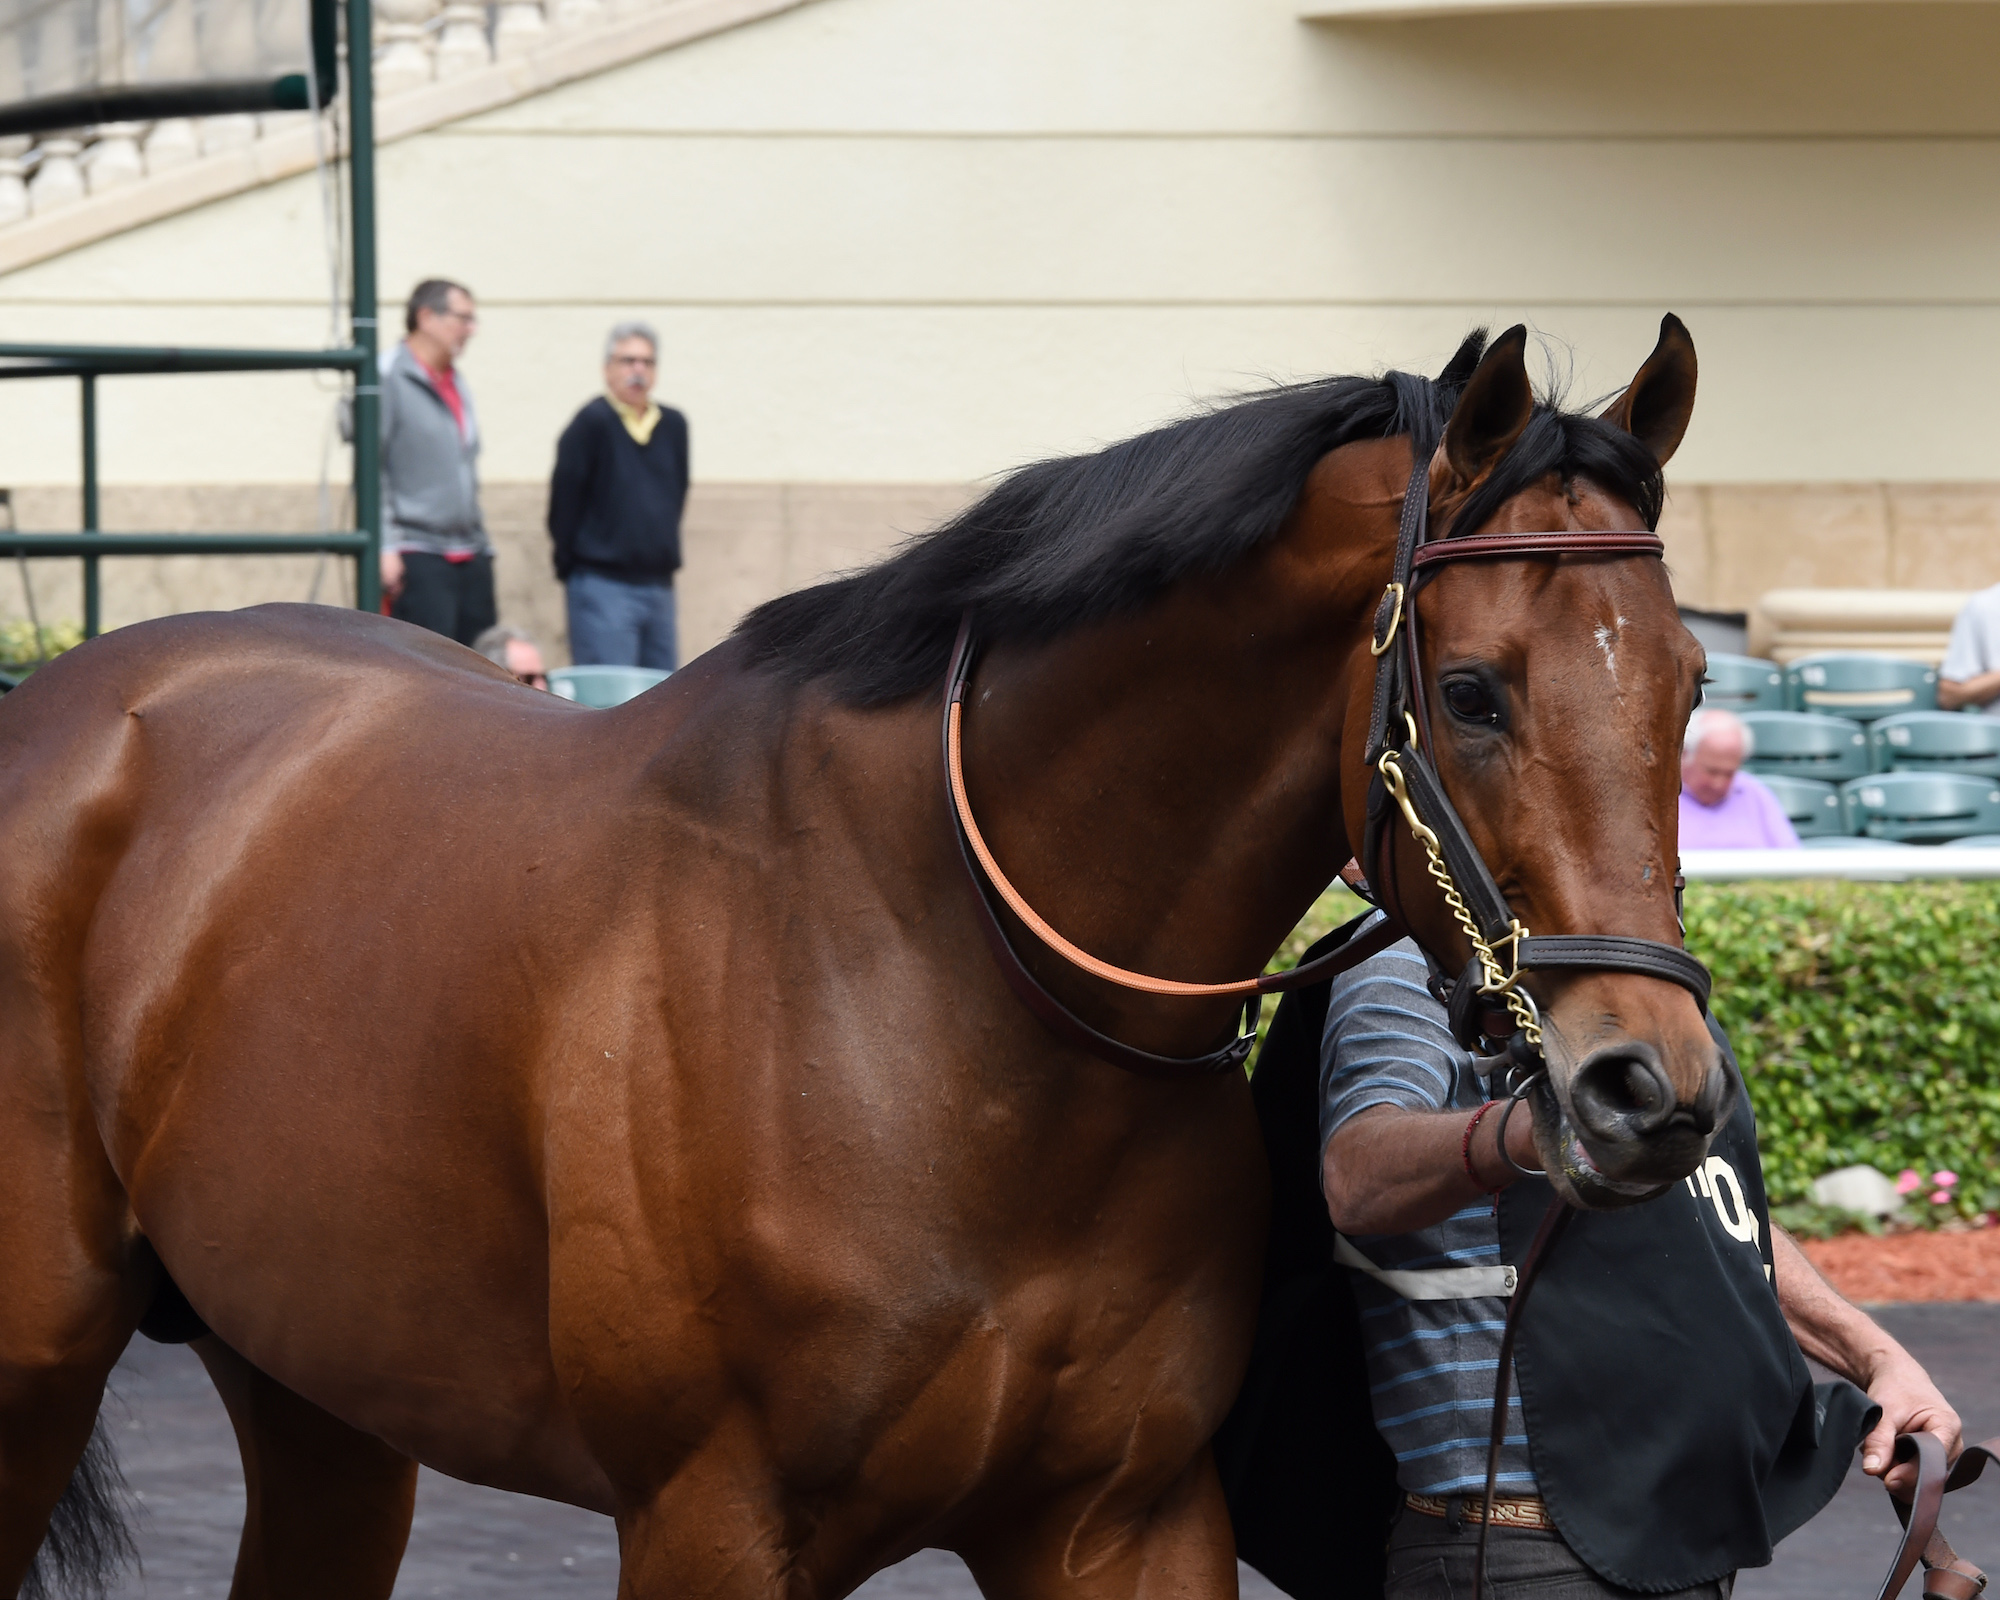 Schooling time: the Bob Baffert-trained West Coast, who will be ridden by Javier Castellano tomorrow, steps out at Gulfstream yesterday. Photo: Gulfstream Park